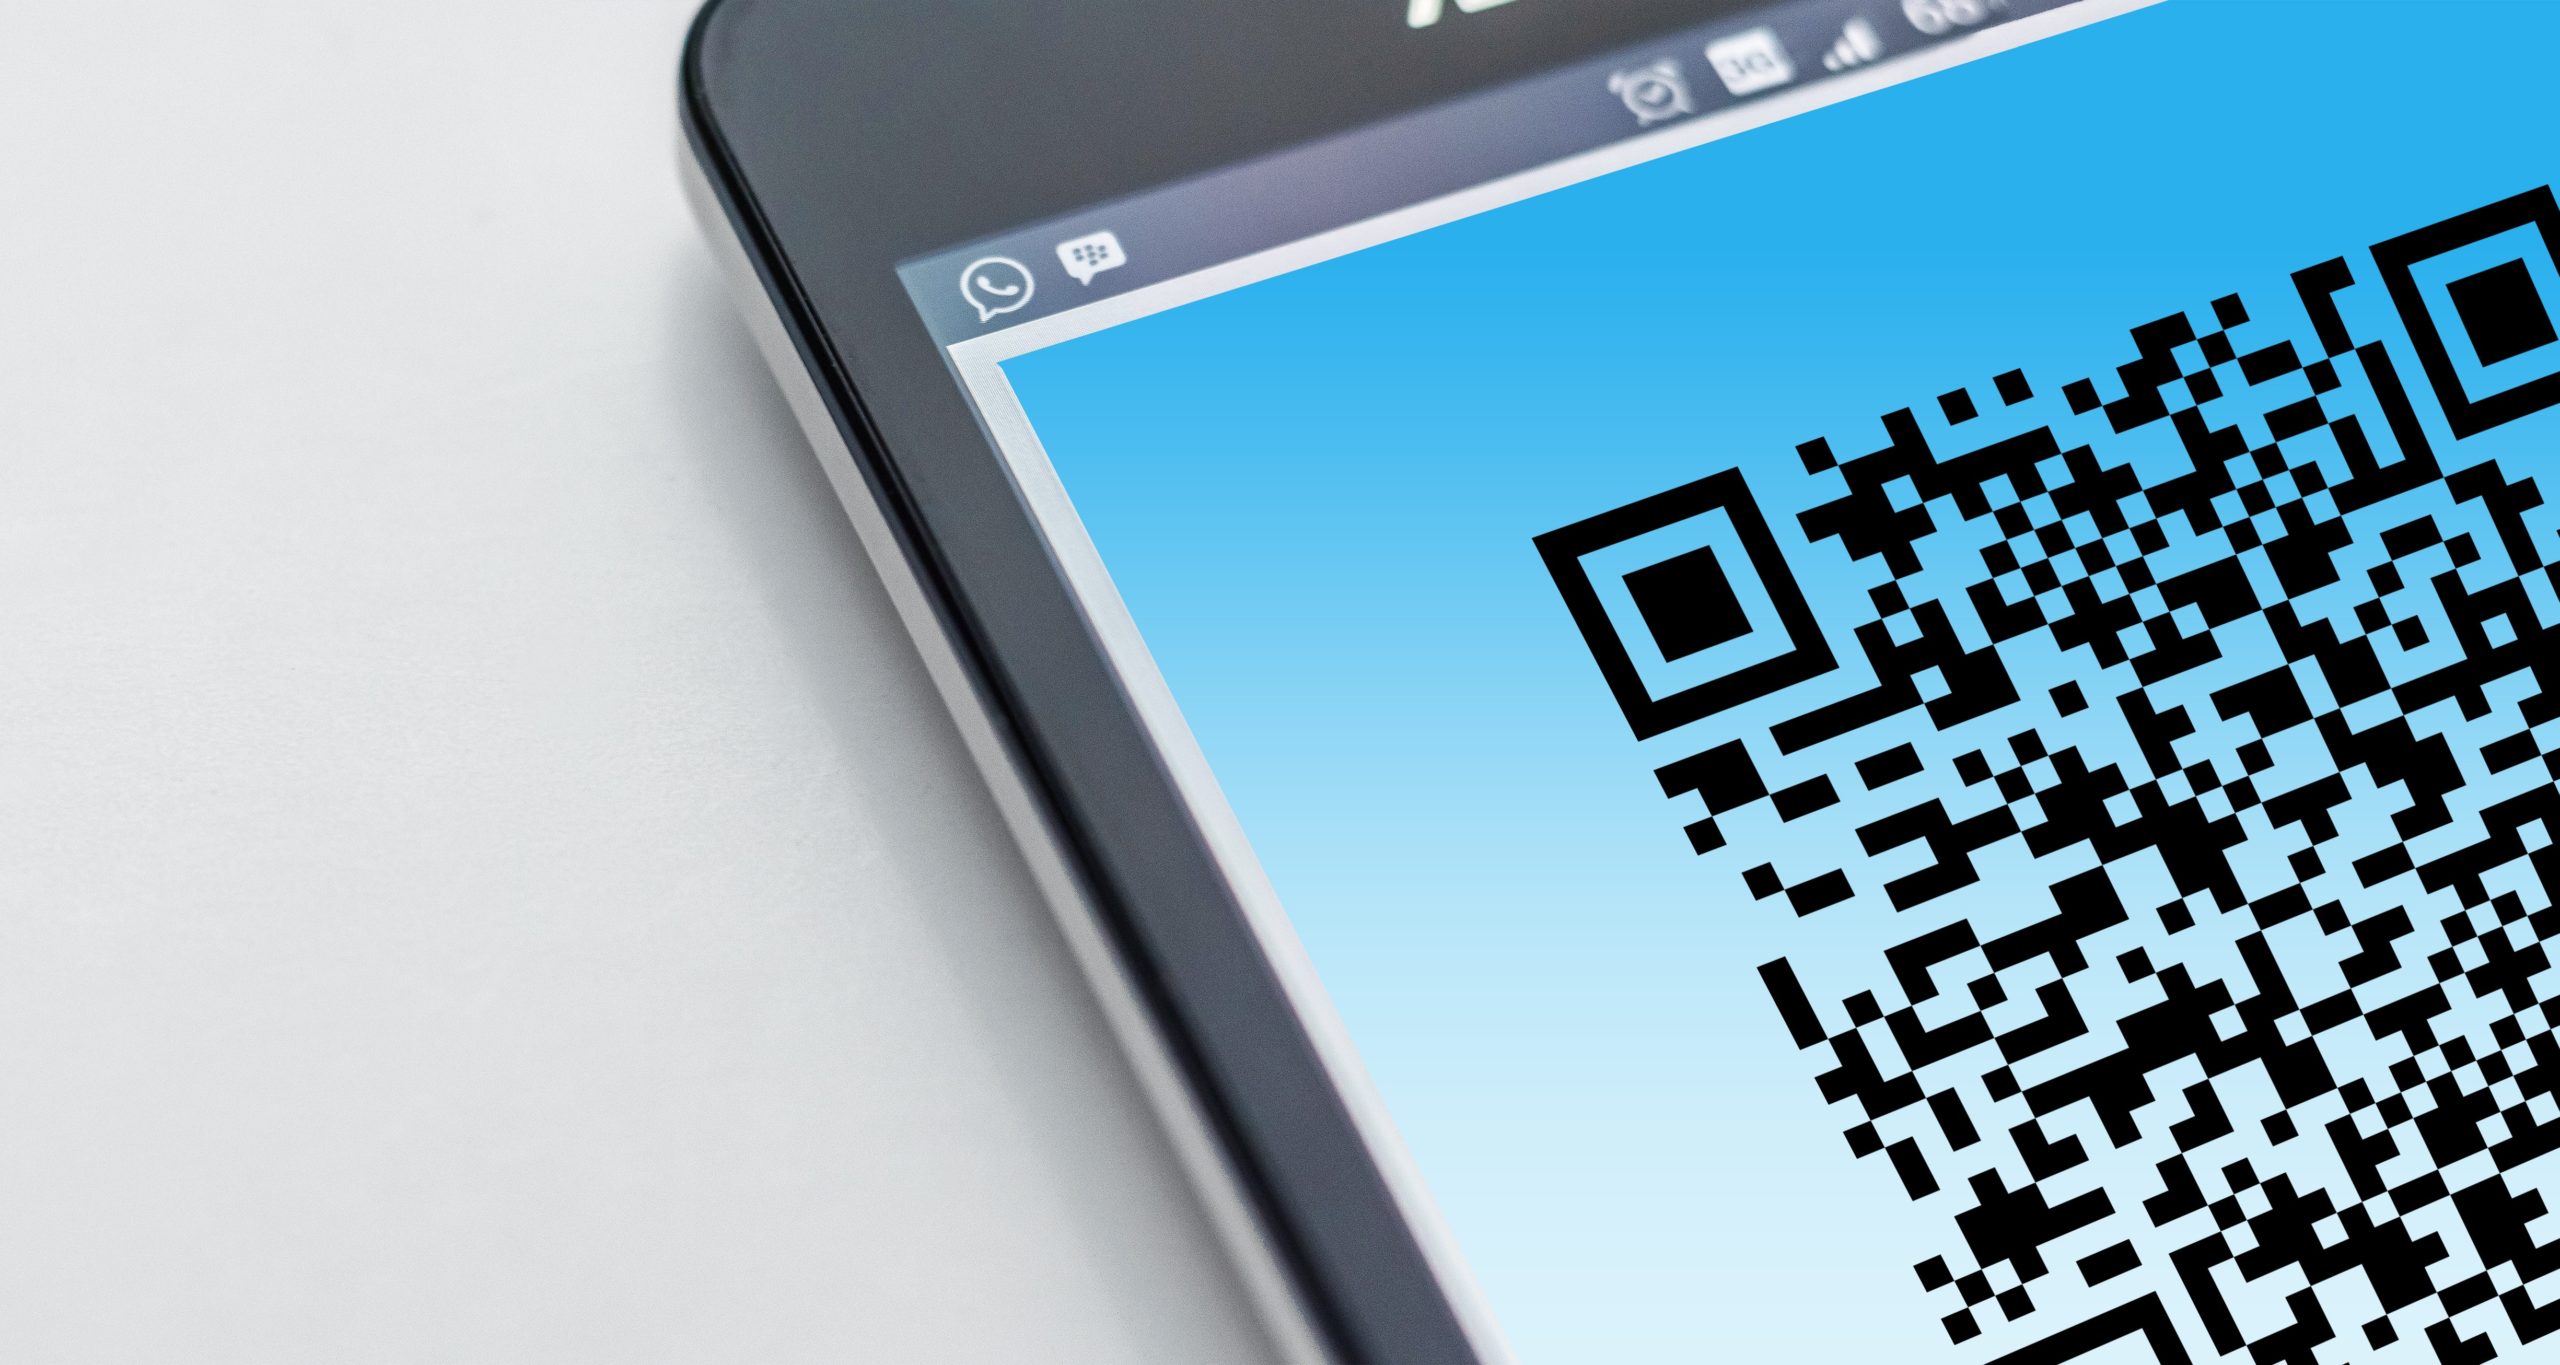 KnowBe4 Helps Organisations Battle QR Code Phishing Attacks With New Tool